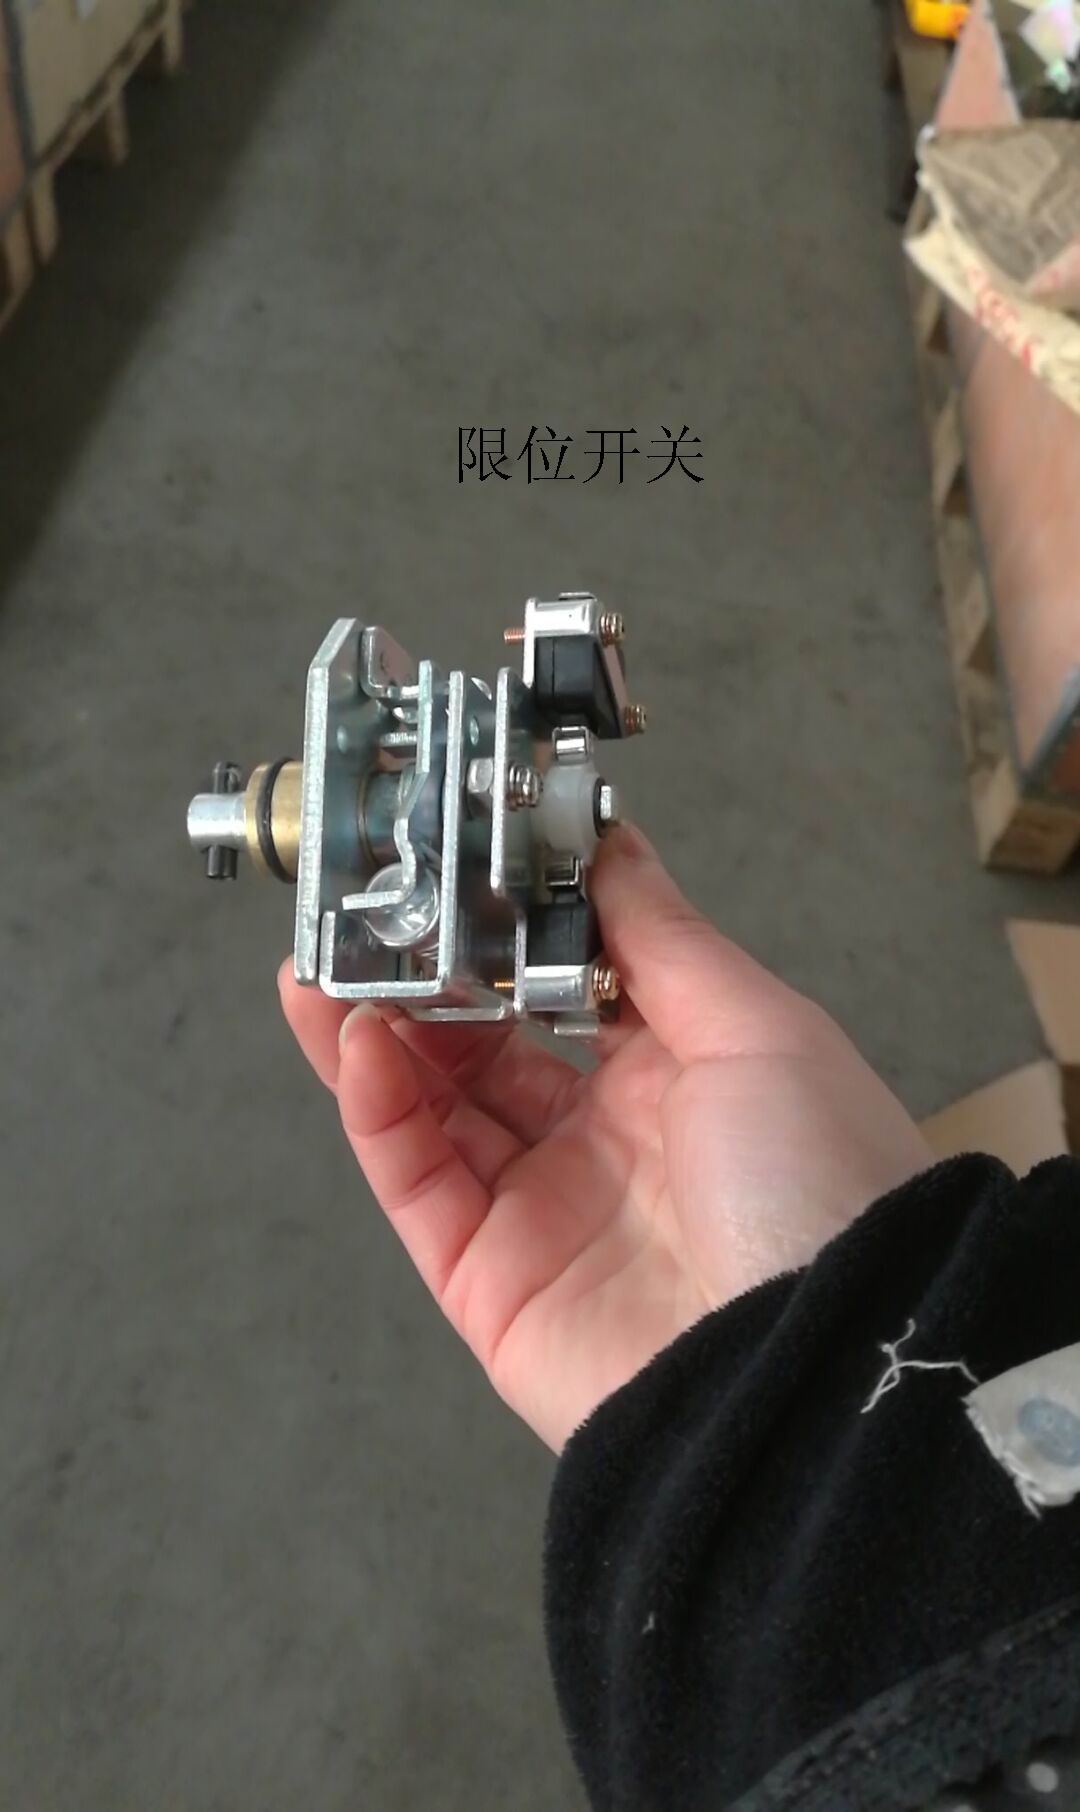 New Limit Switch for electric chain hoist-限位开关.jpg